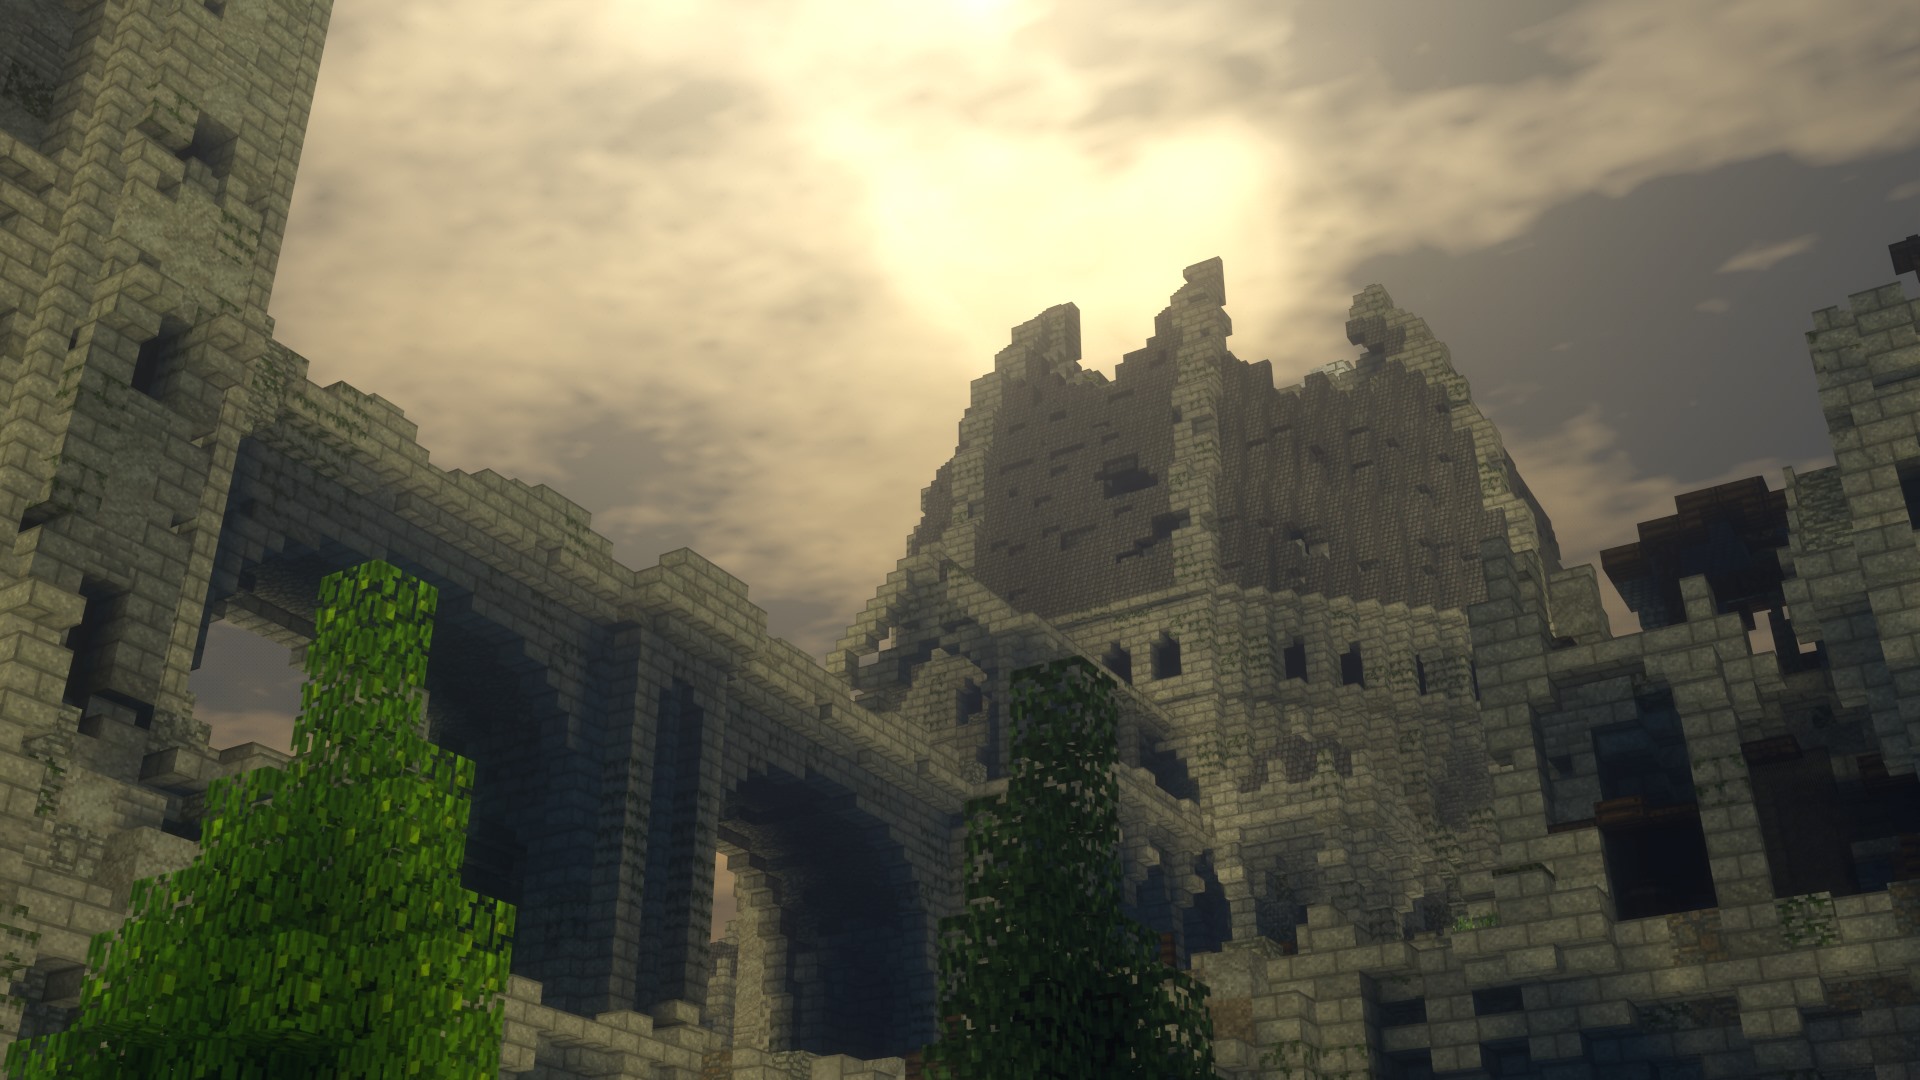 Minecraft Middle-earth Celebrates 10 Years